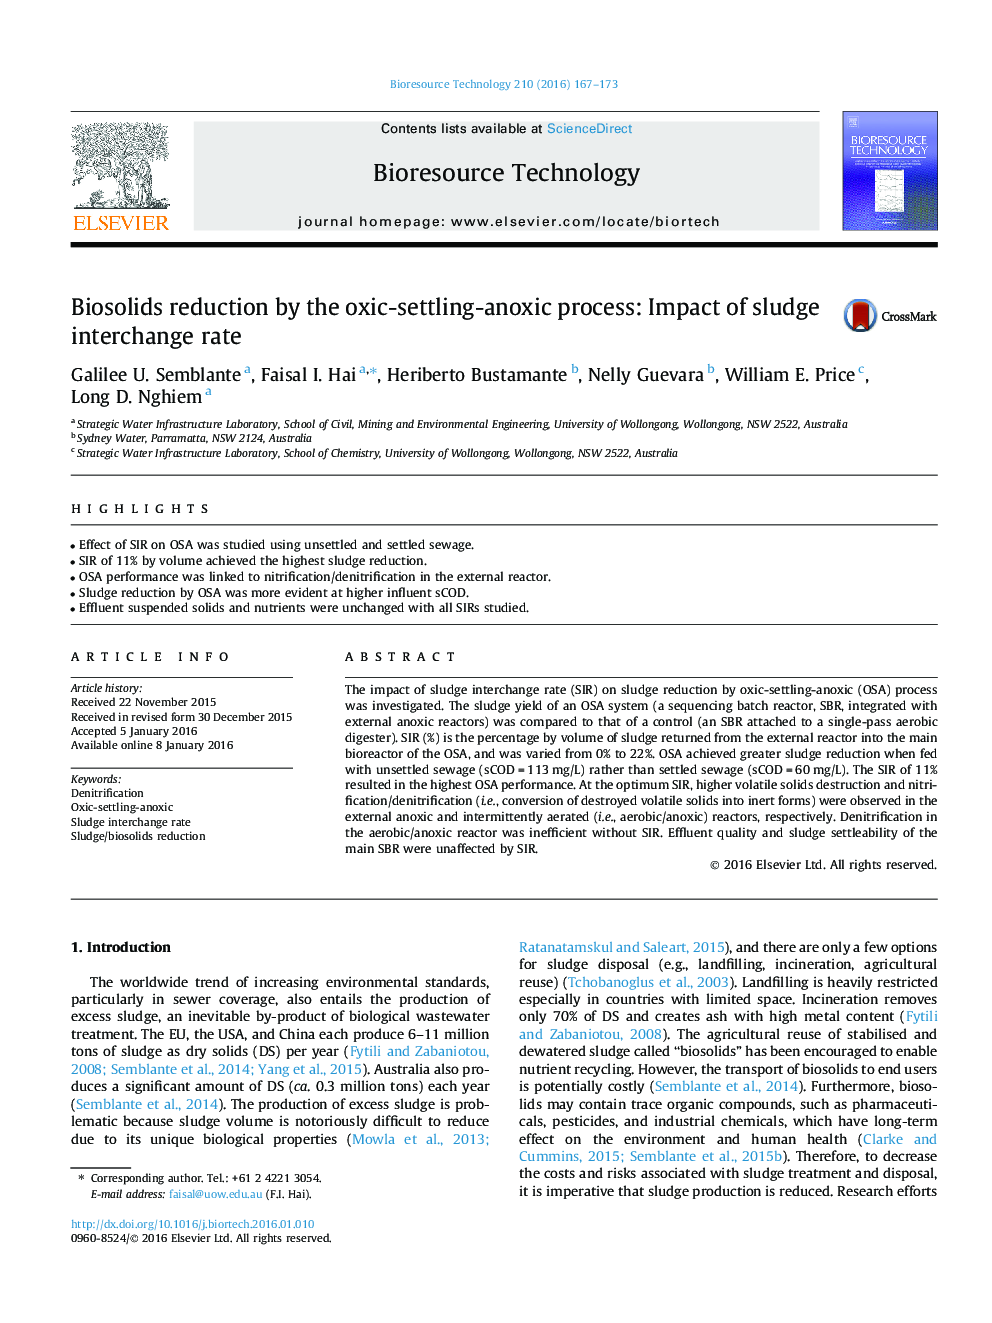 Biosolids reduction by the oxic-settling-anoxic process: Impact of sludge interchange rate